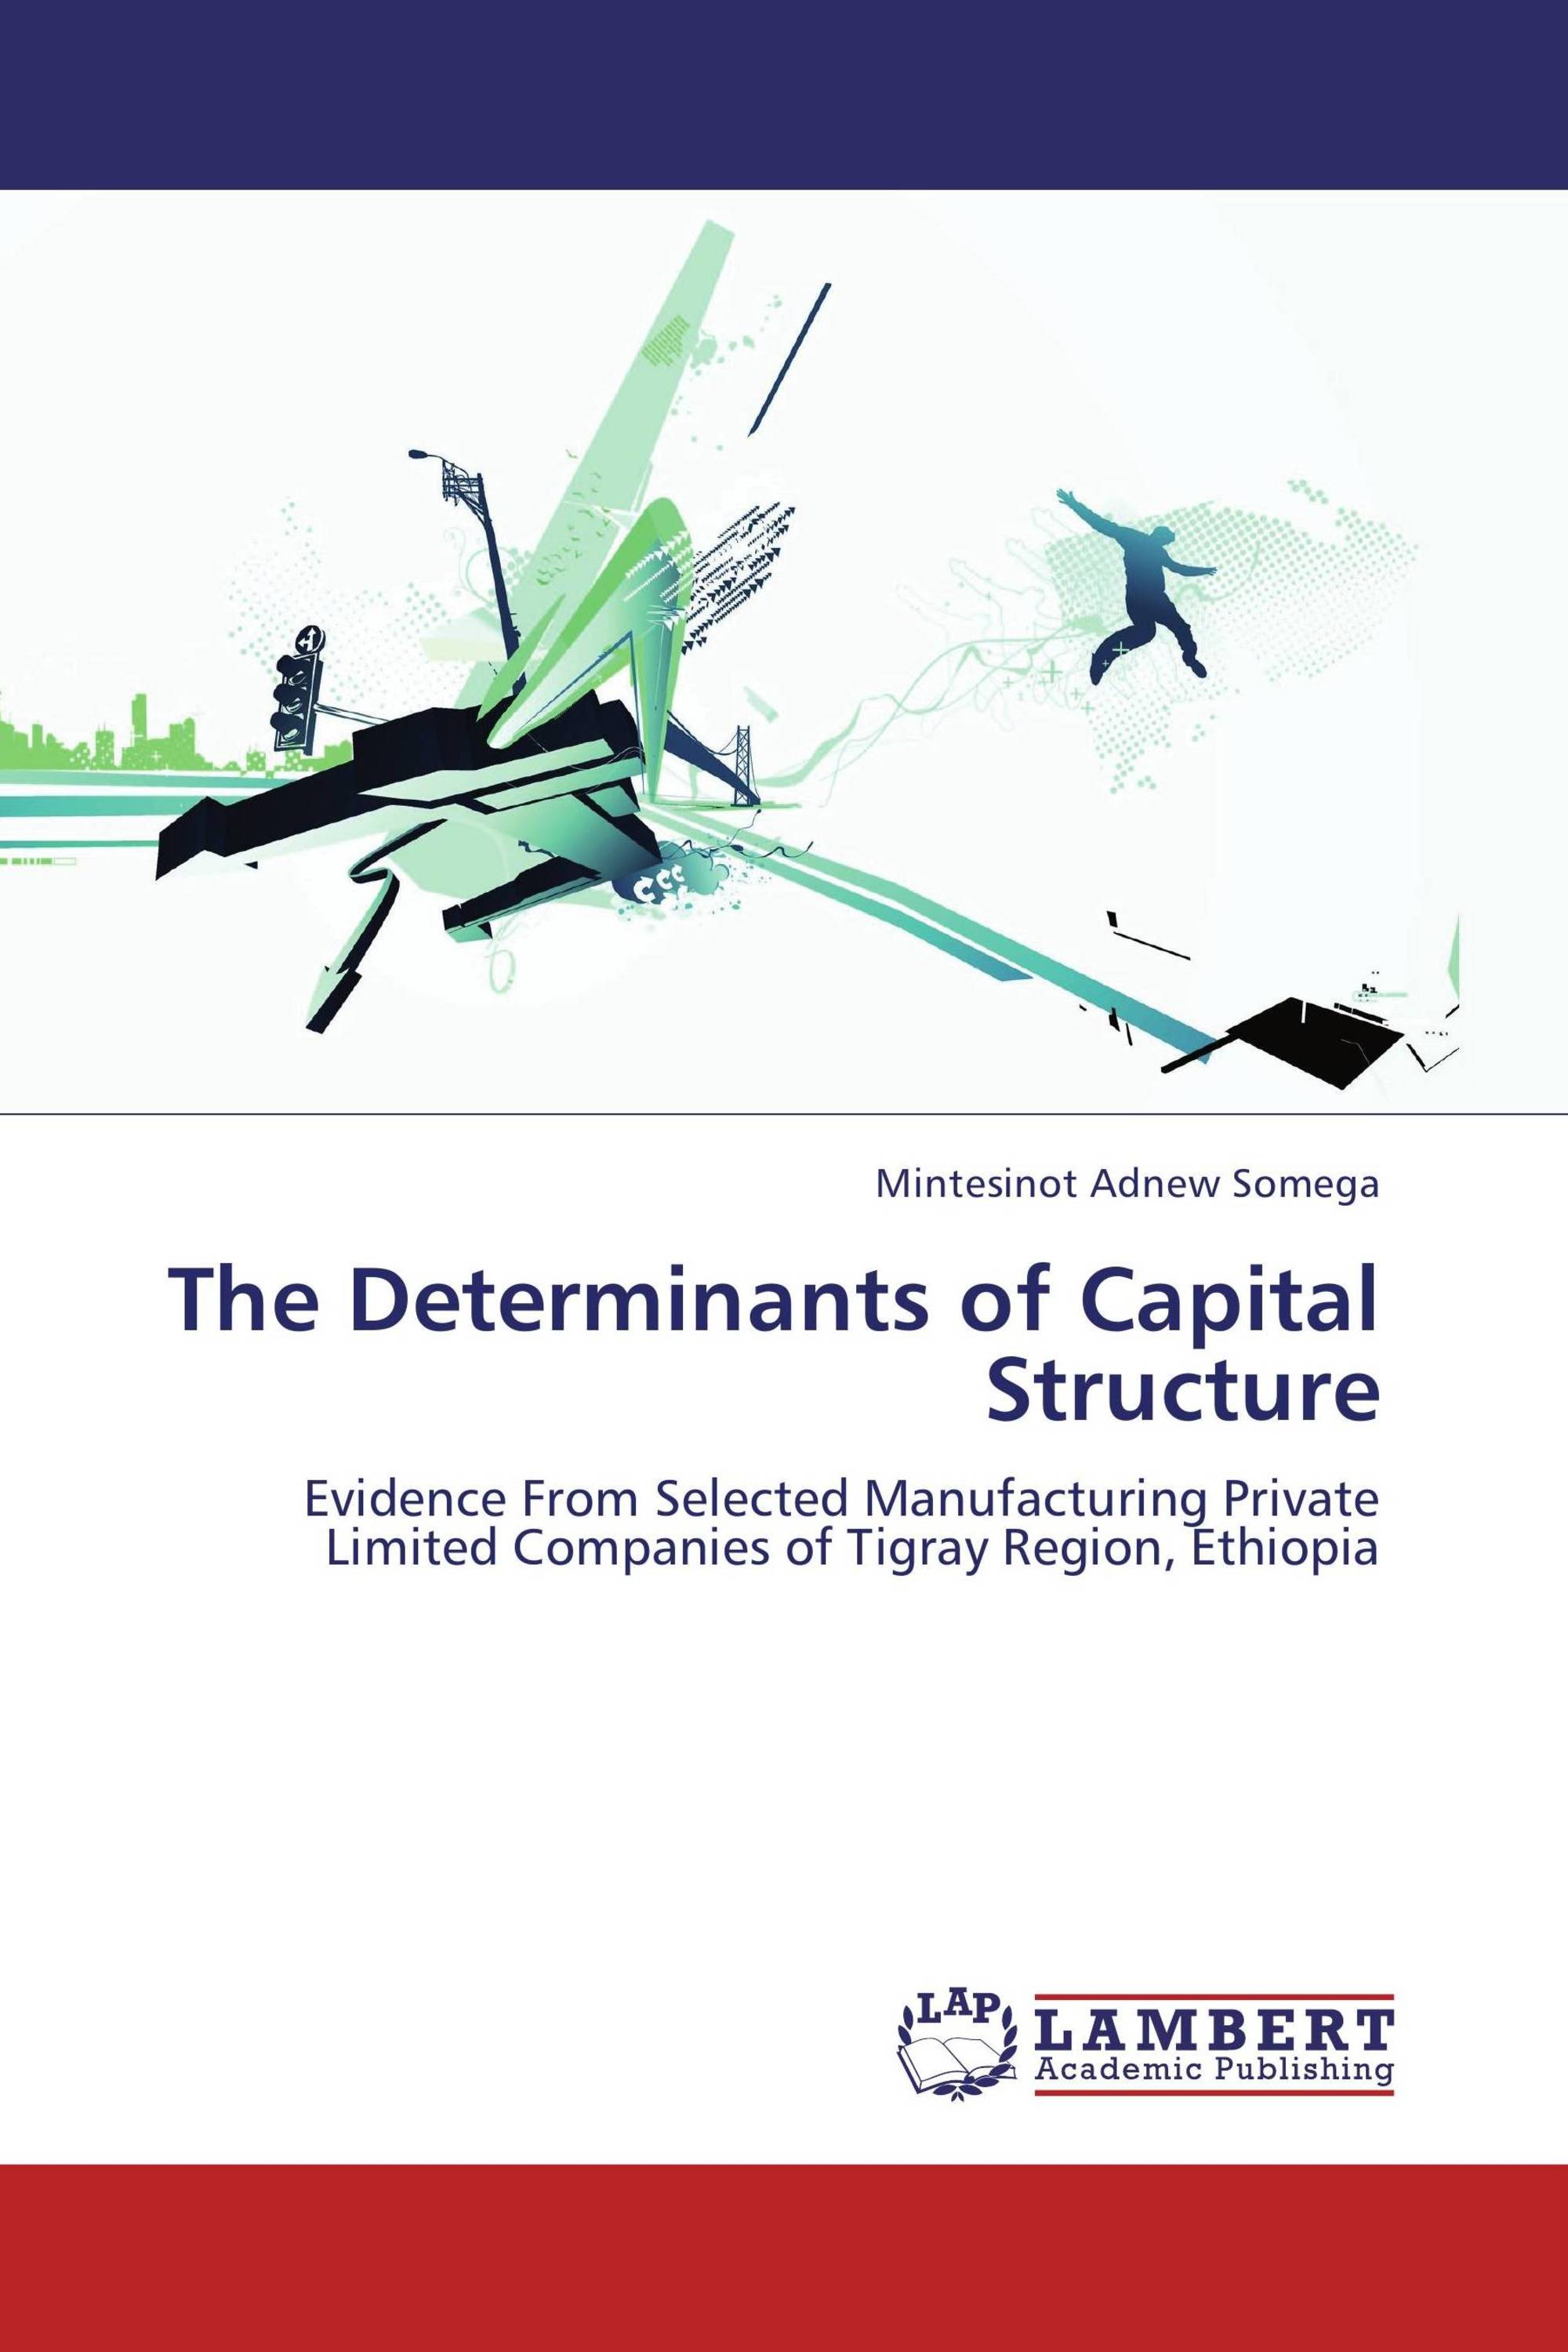 article review title determinants of capital structure decision